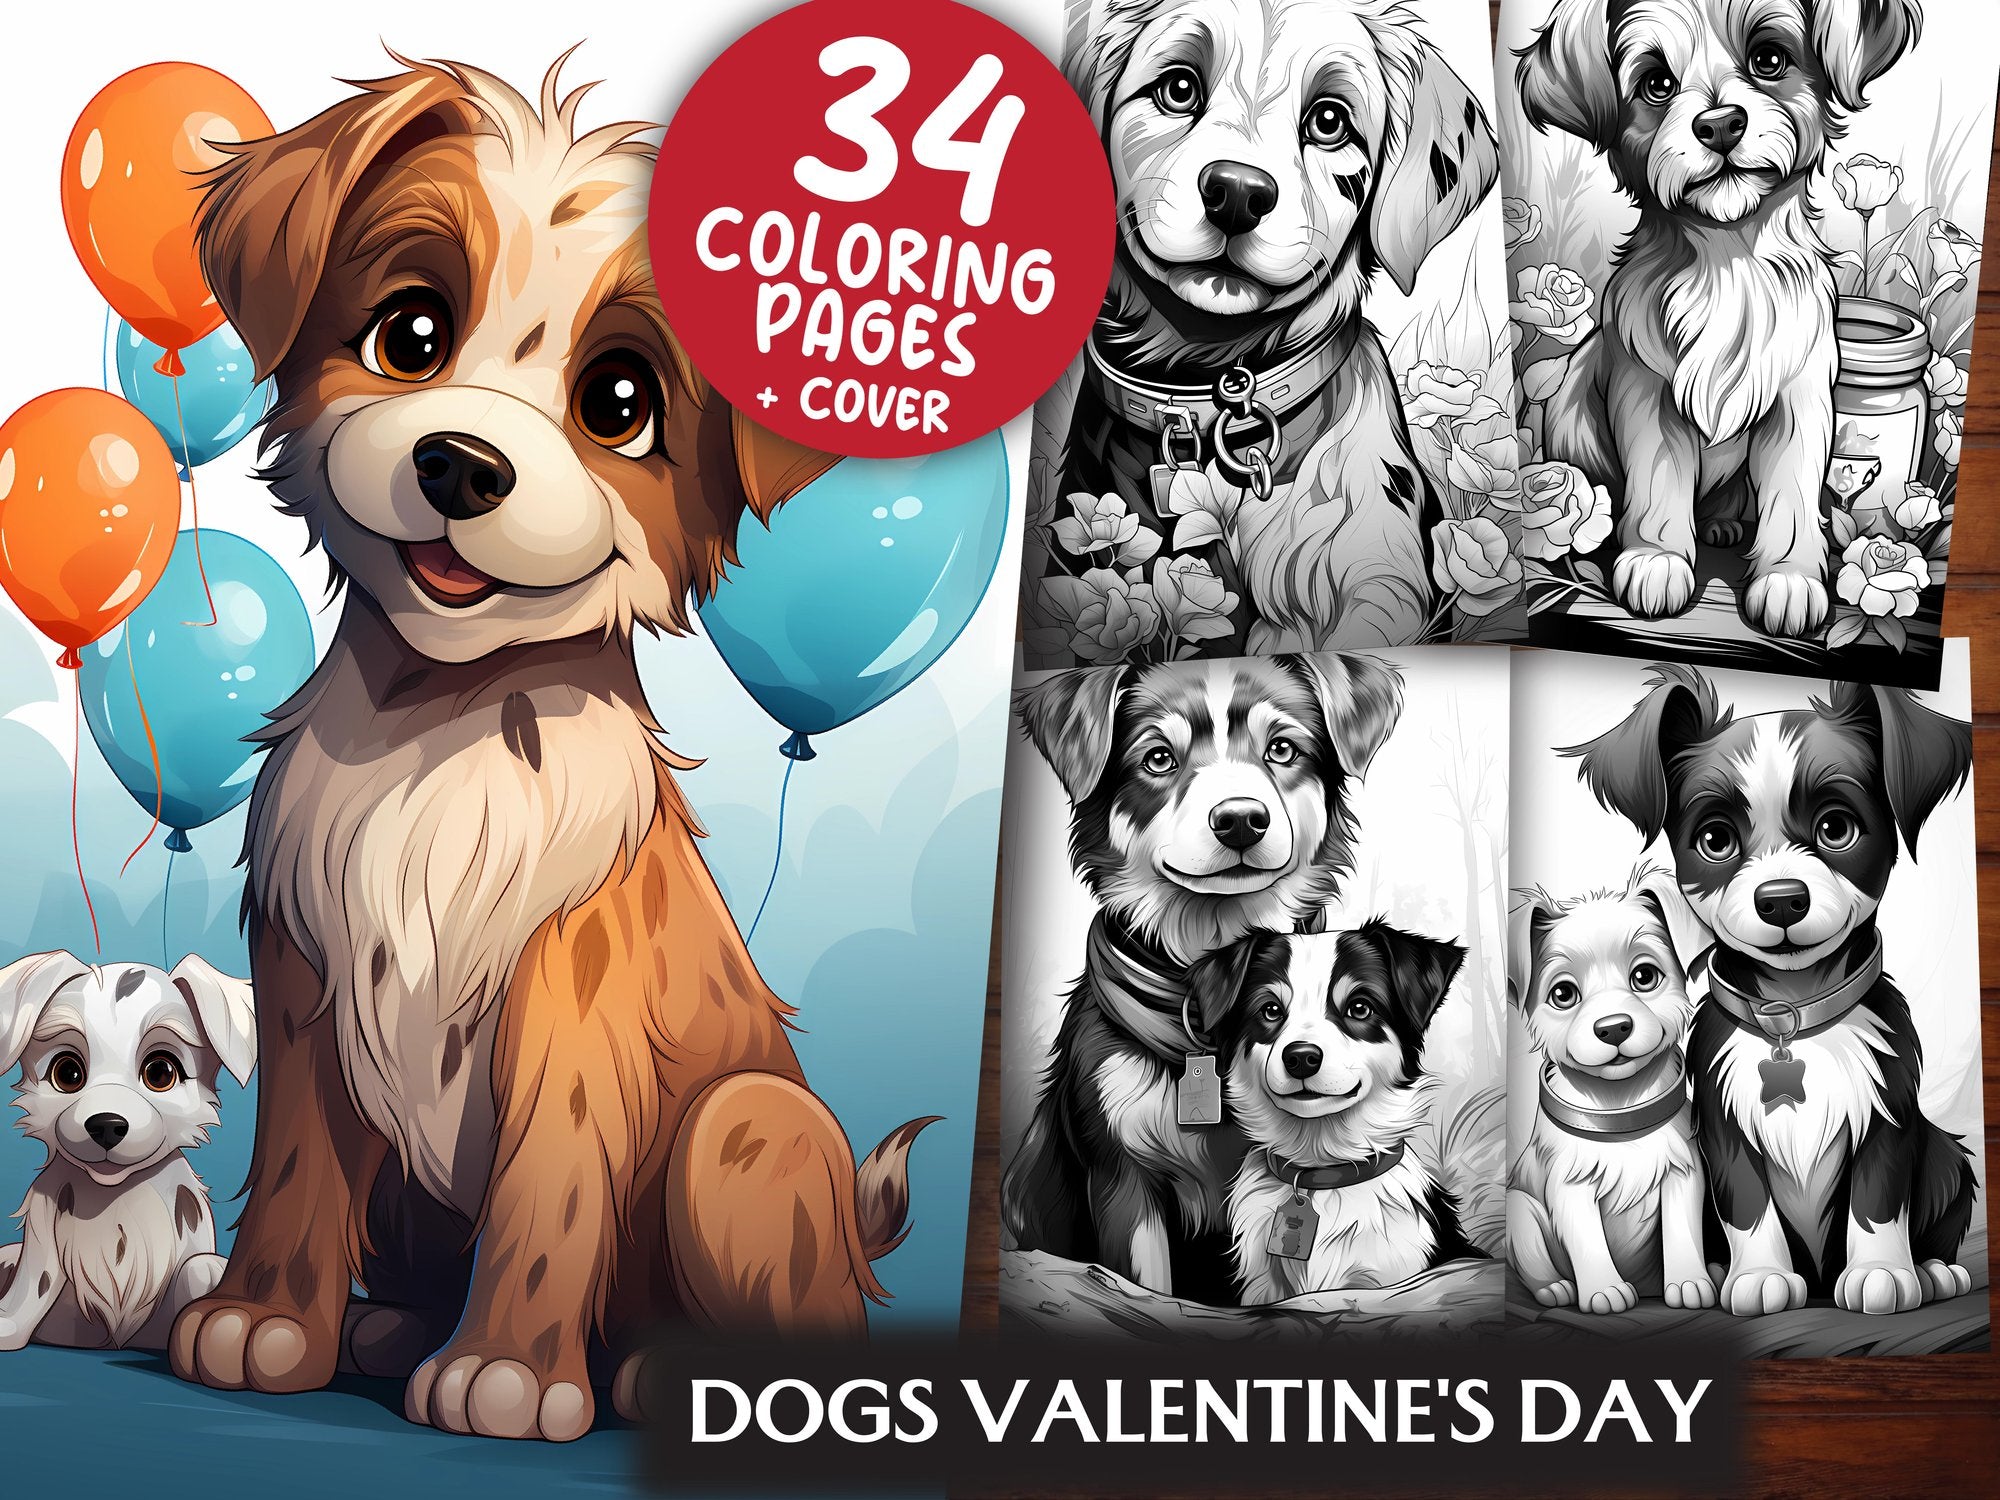 Dogs Valentines Day Coloring Books - CraftNest